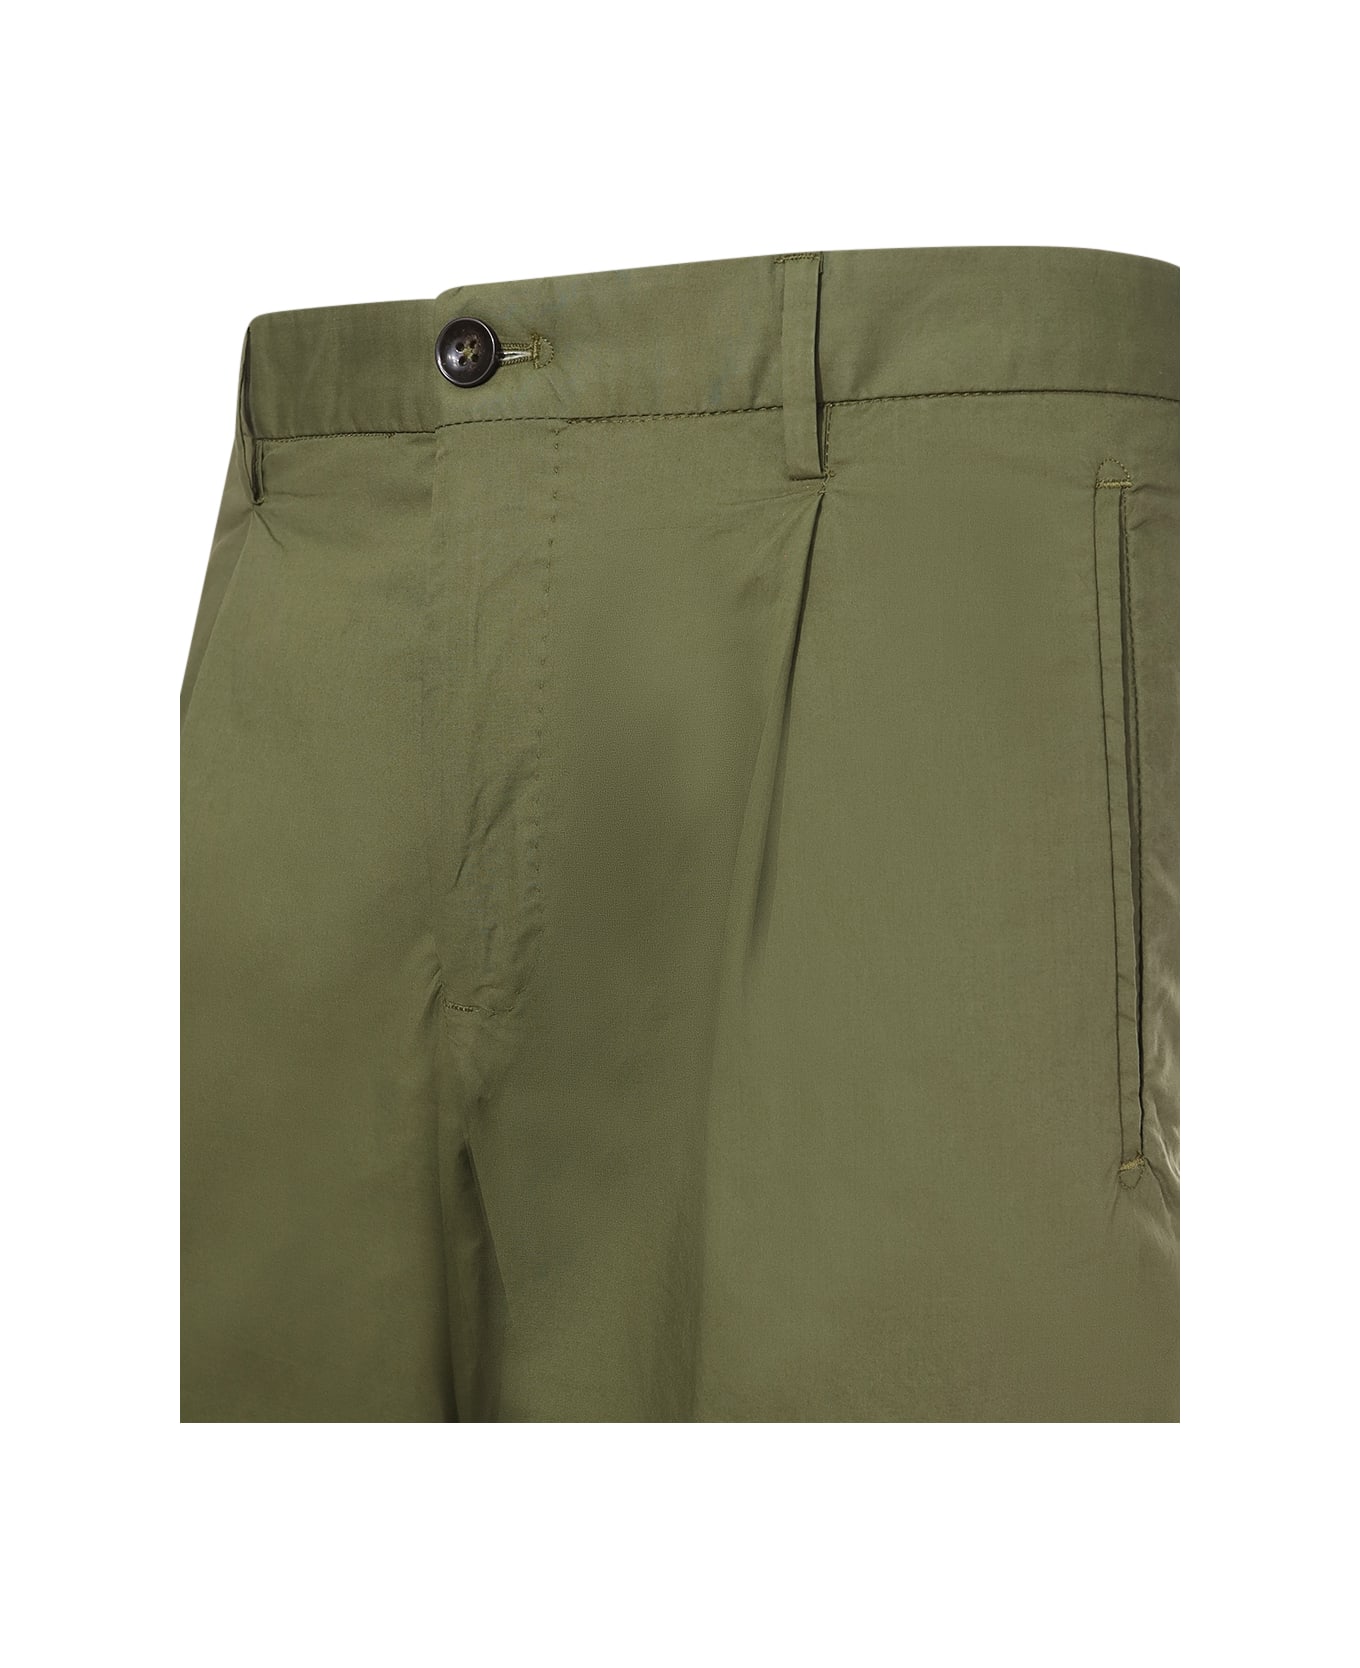 Incotex Trousers With Pleats - Green